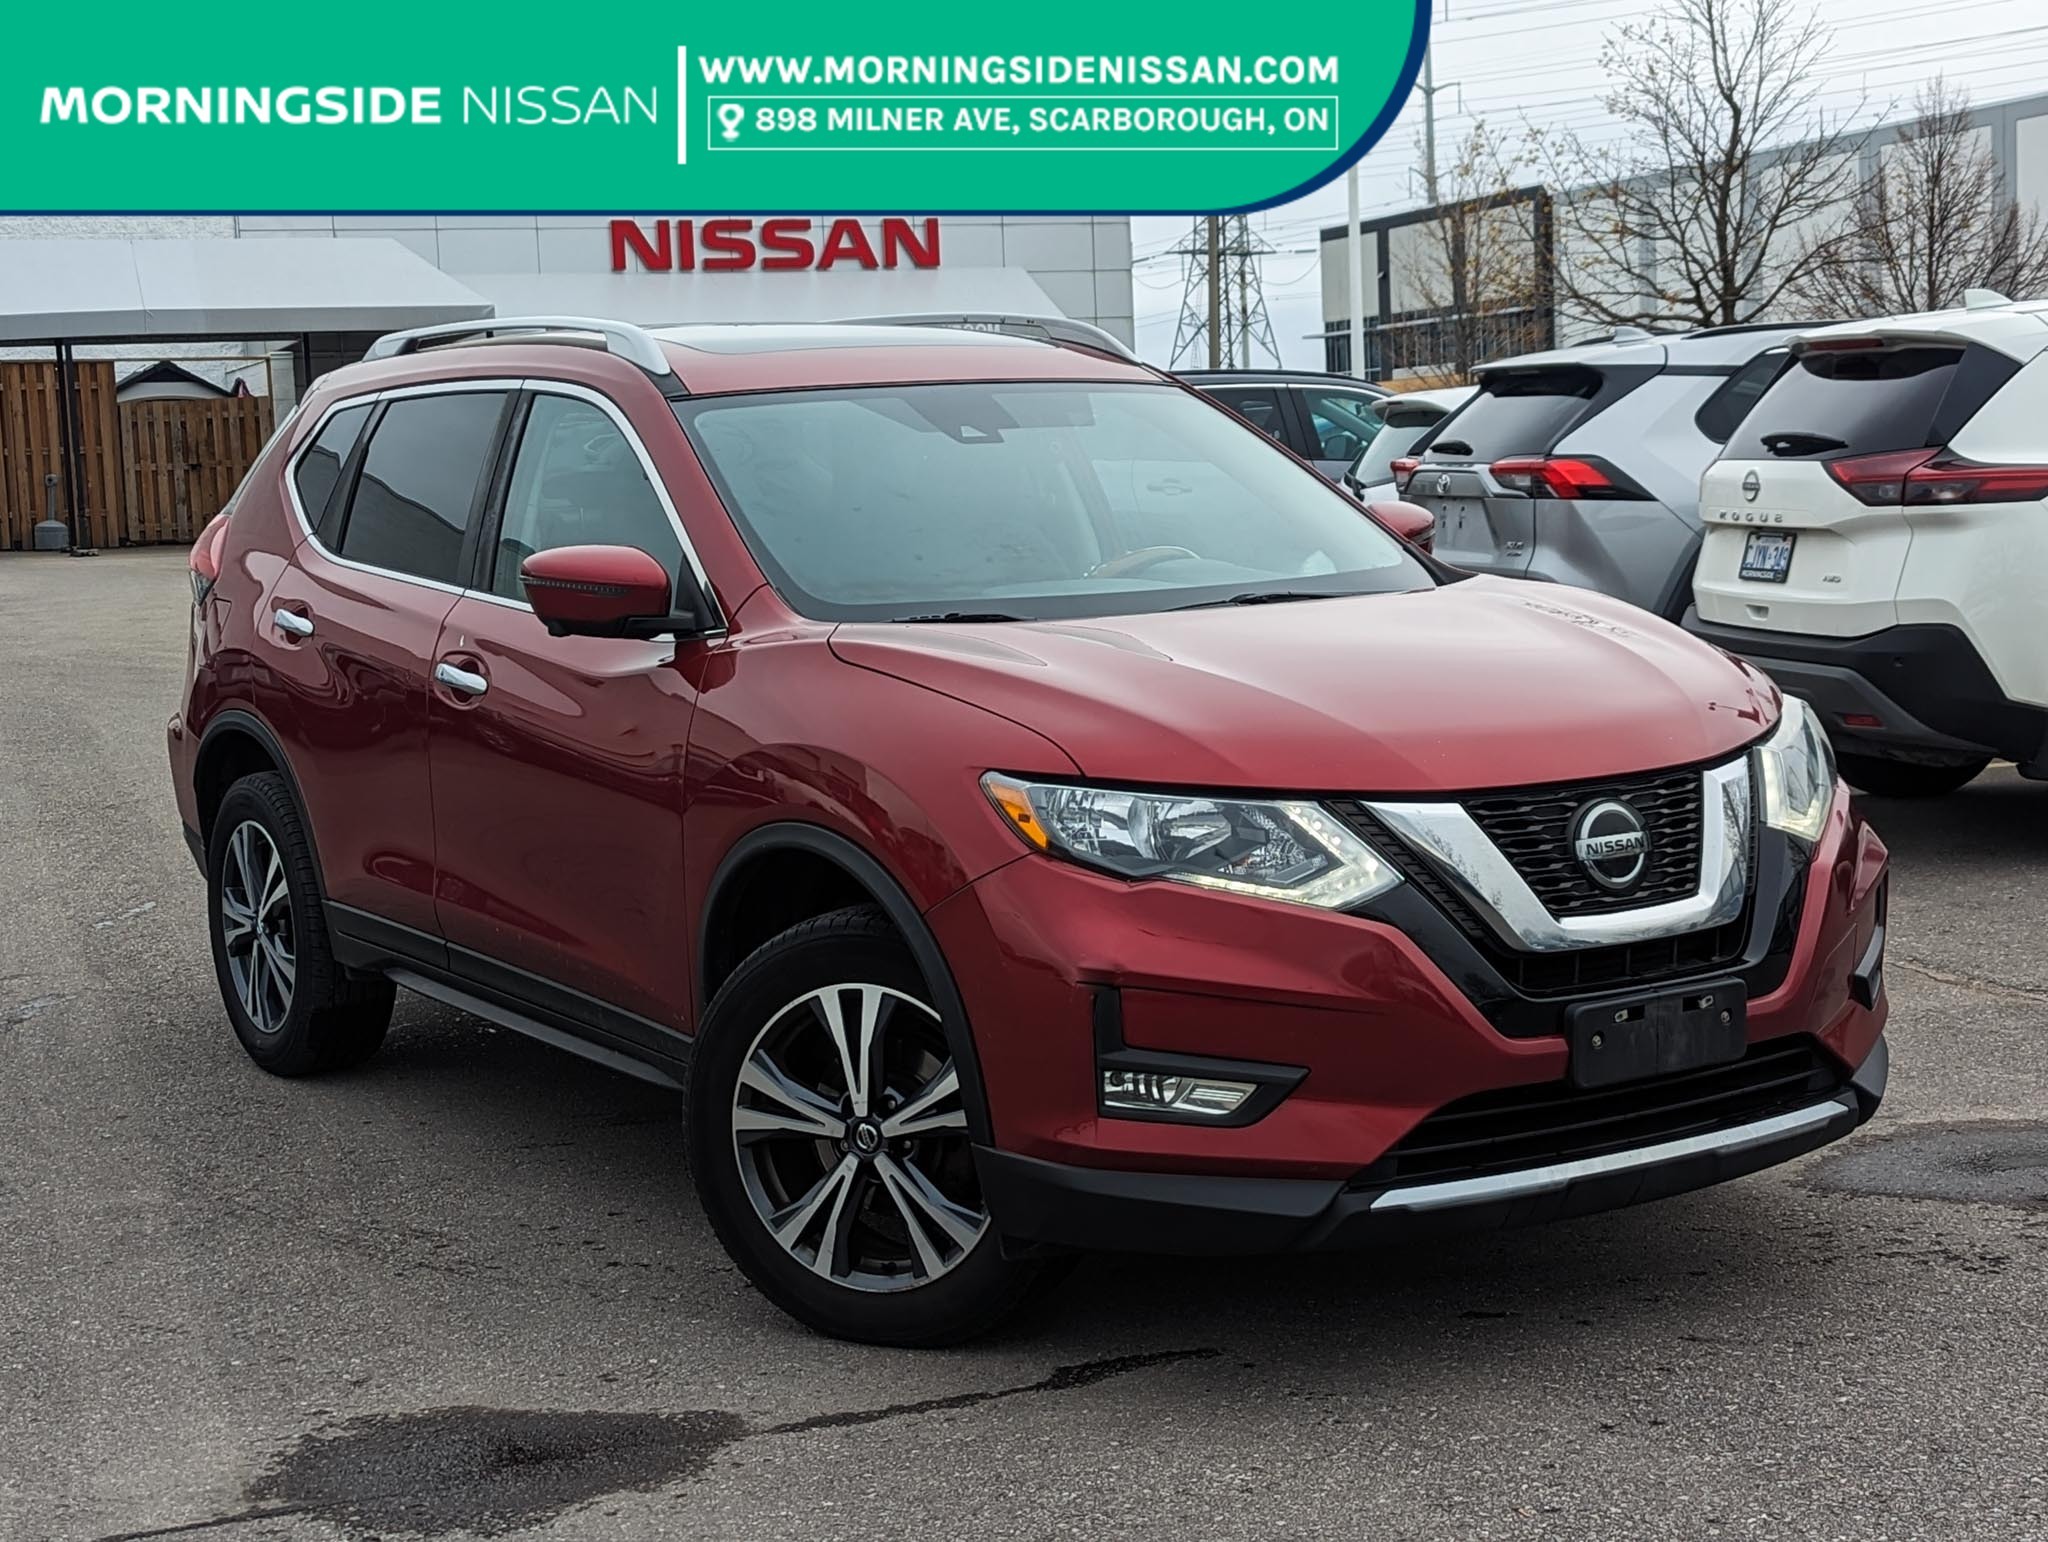 2019 Nissan Rogue SV AWD TECH PACKAGE|NO ACCIDENT|NAVI|